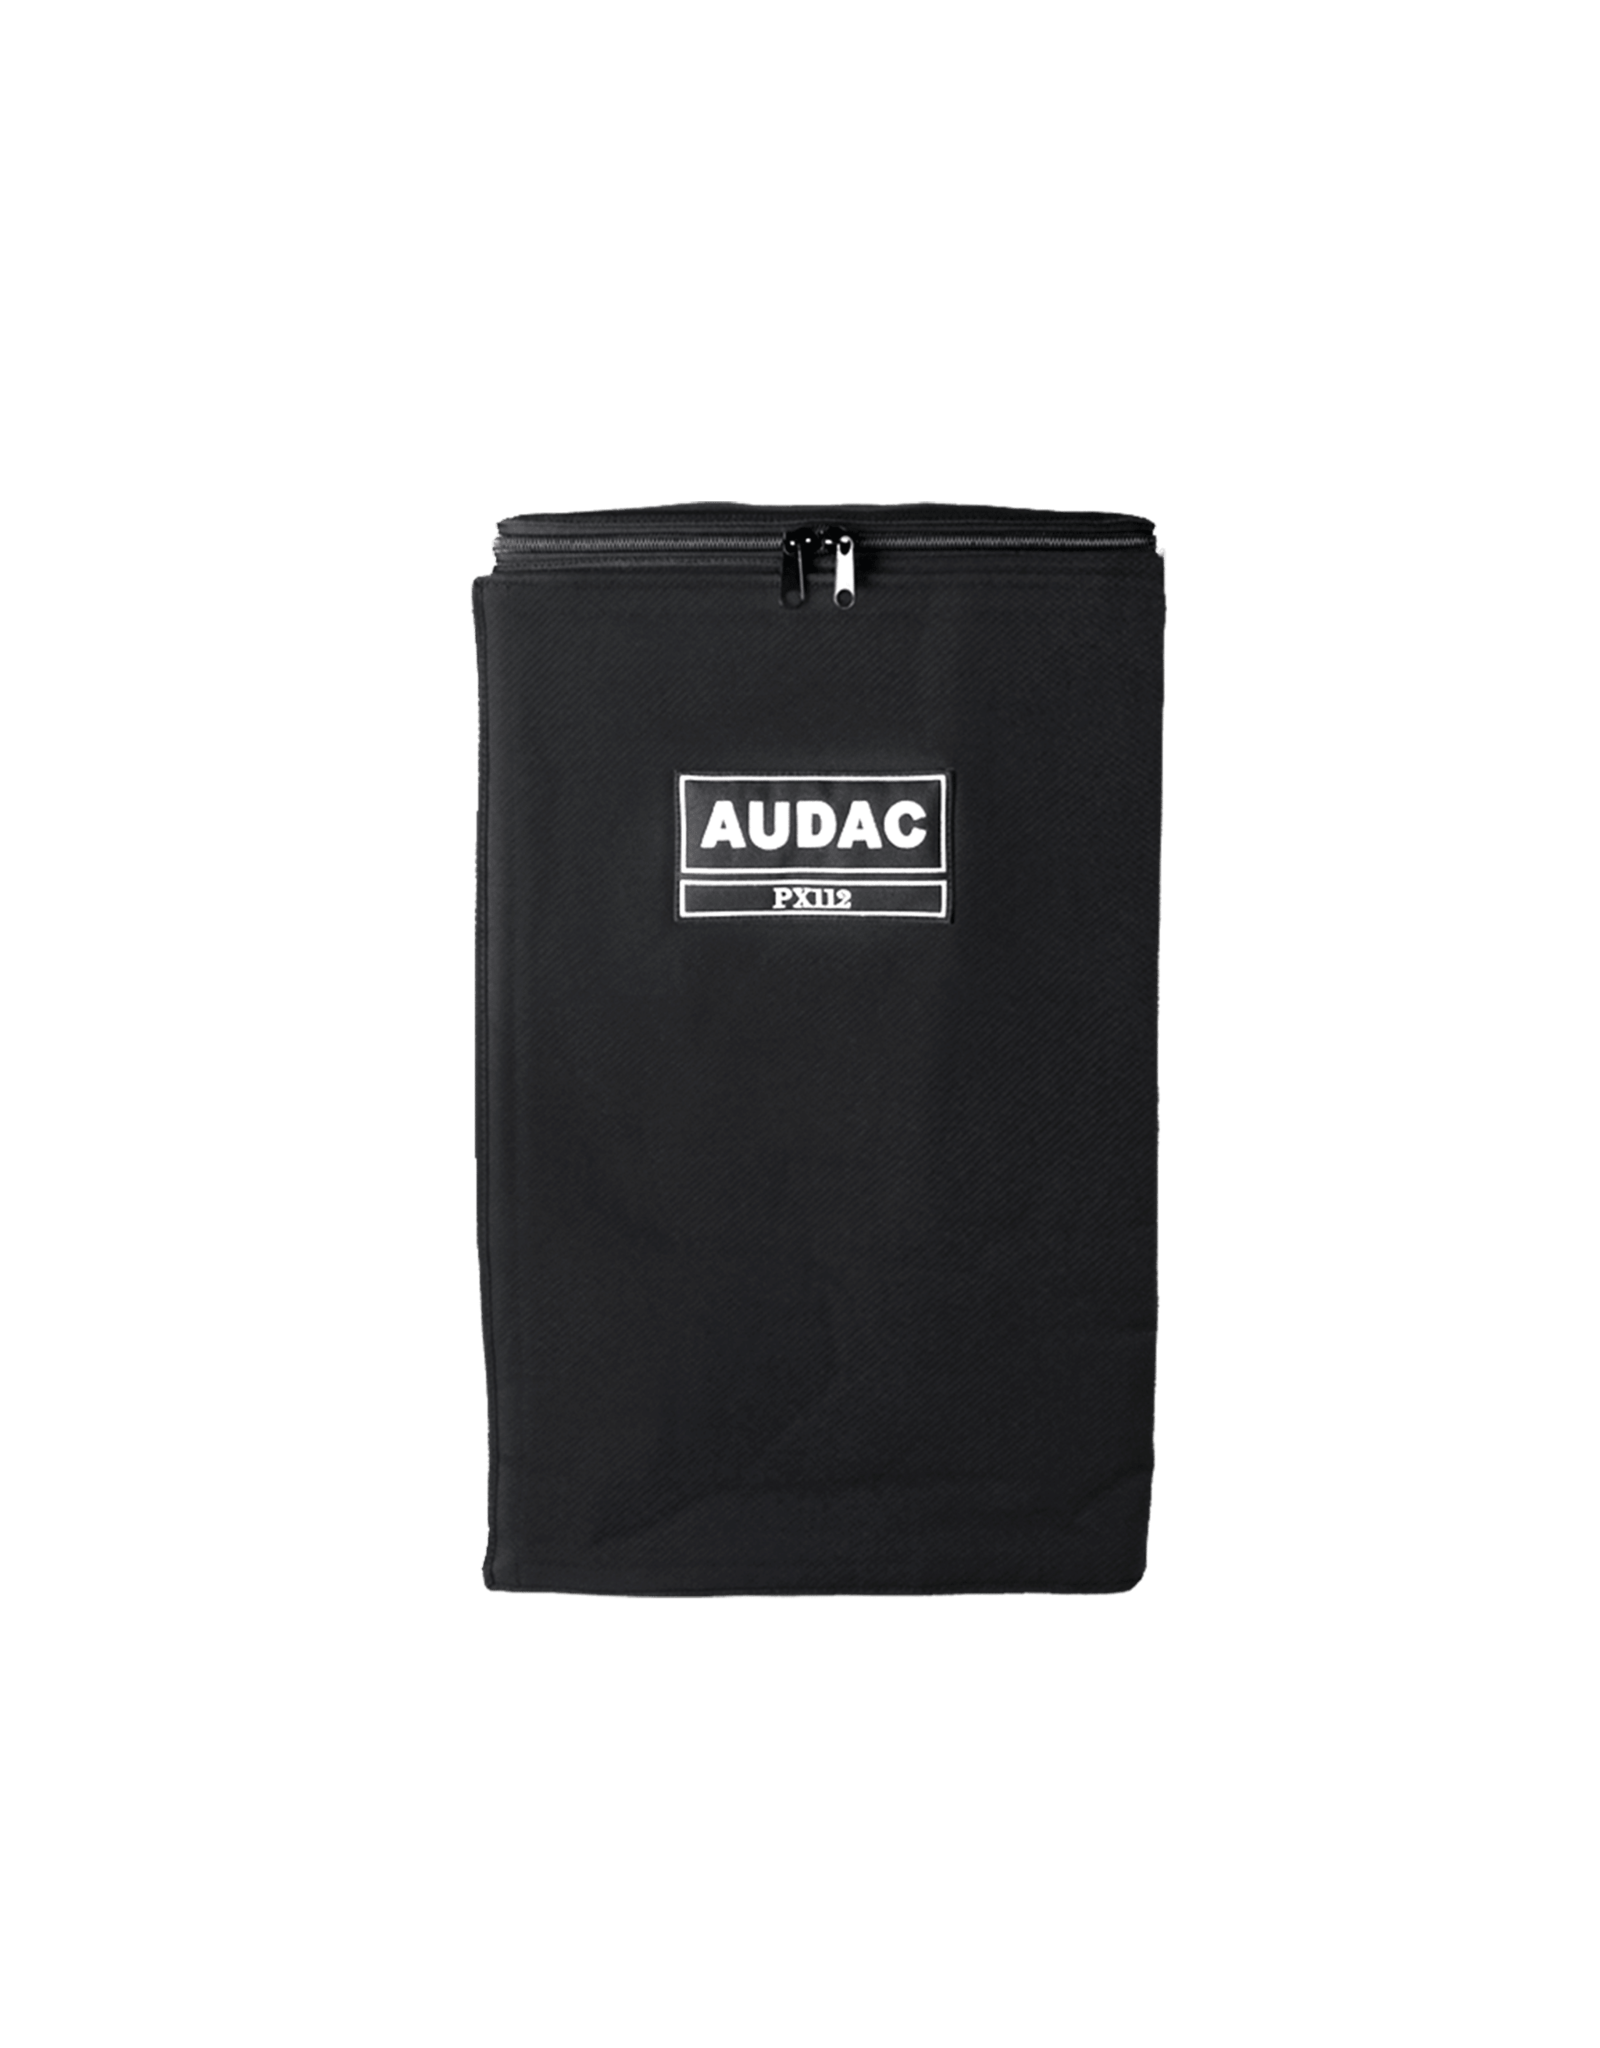 Audac Cover bag for PX112